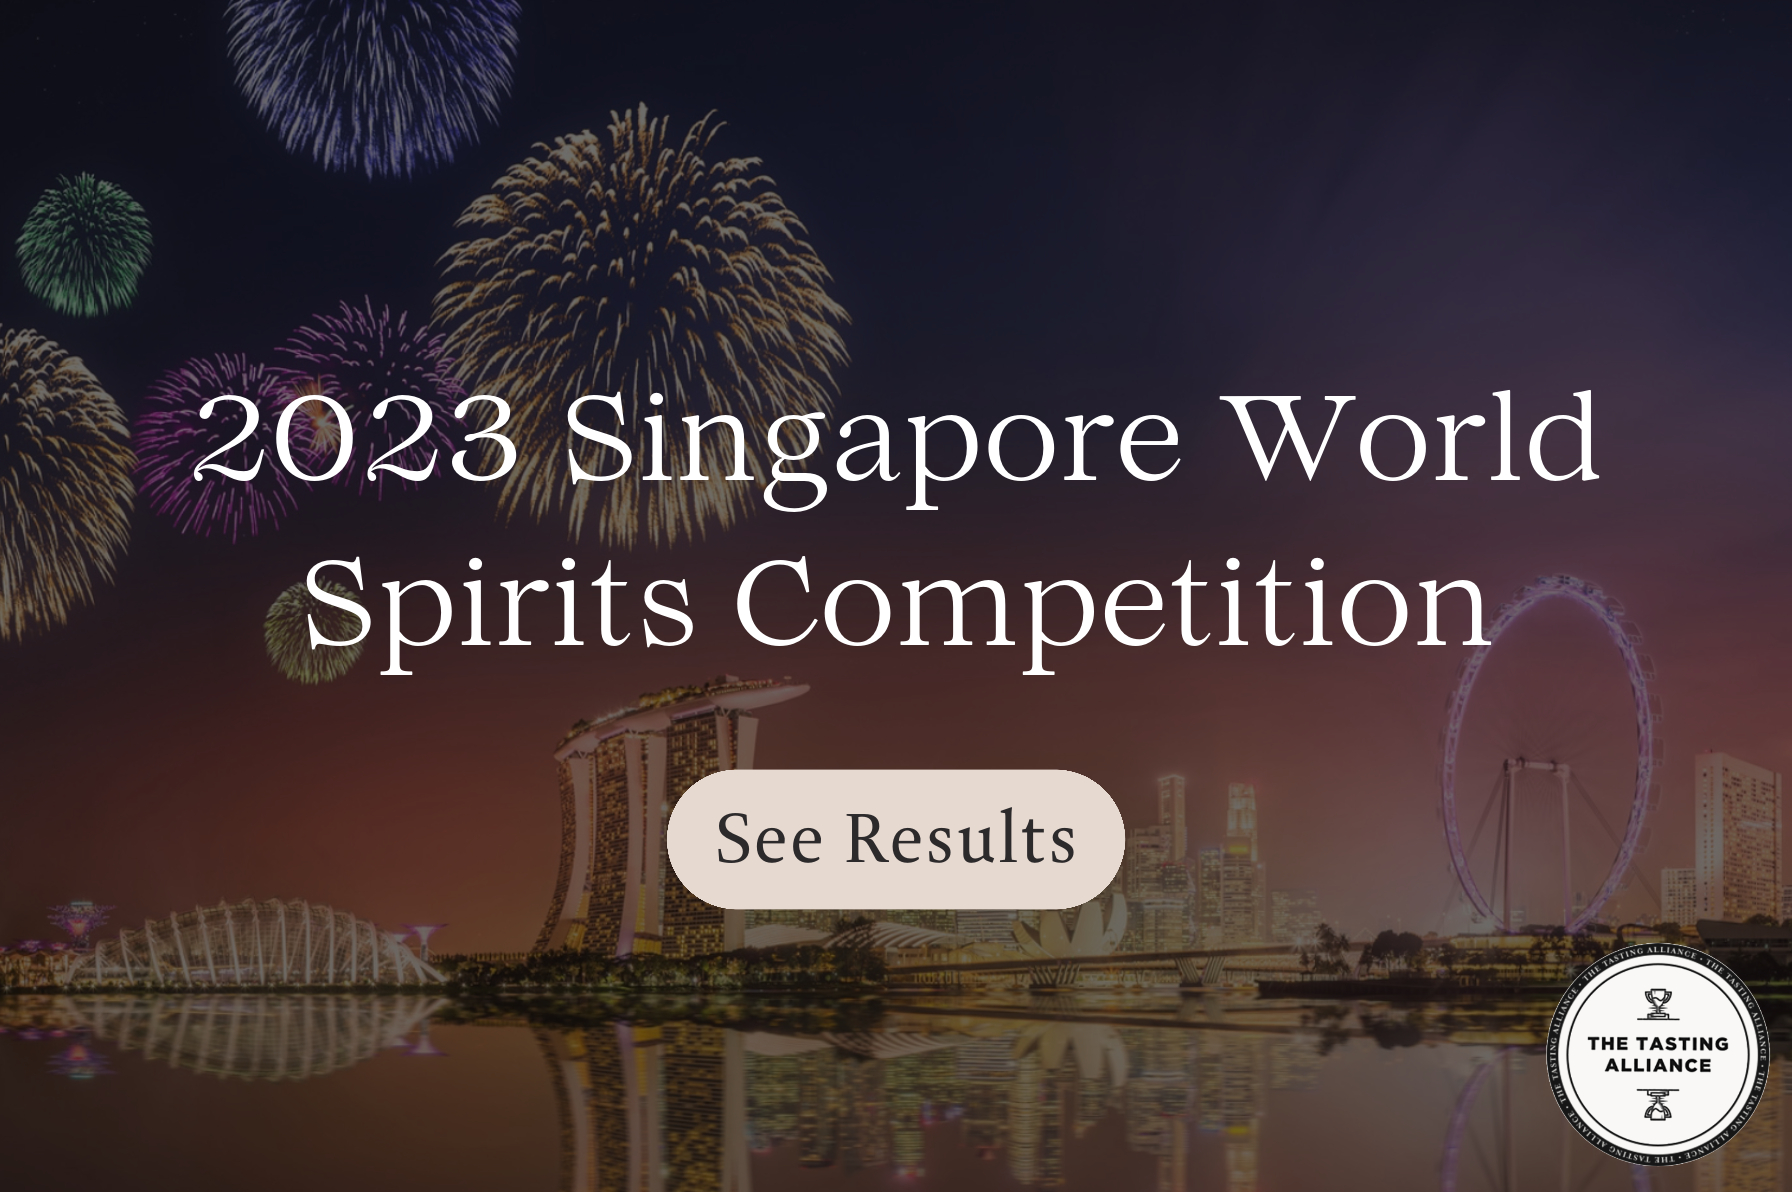 The results from The Tasting Alliance's Singapore World Spirits Competition